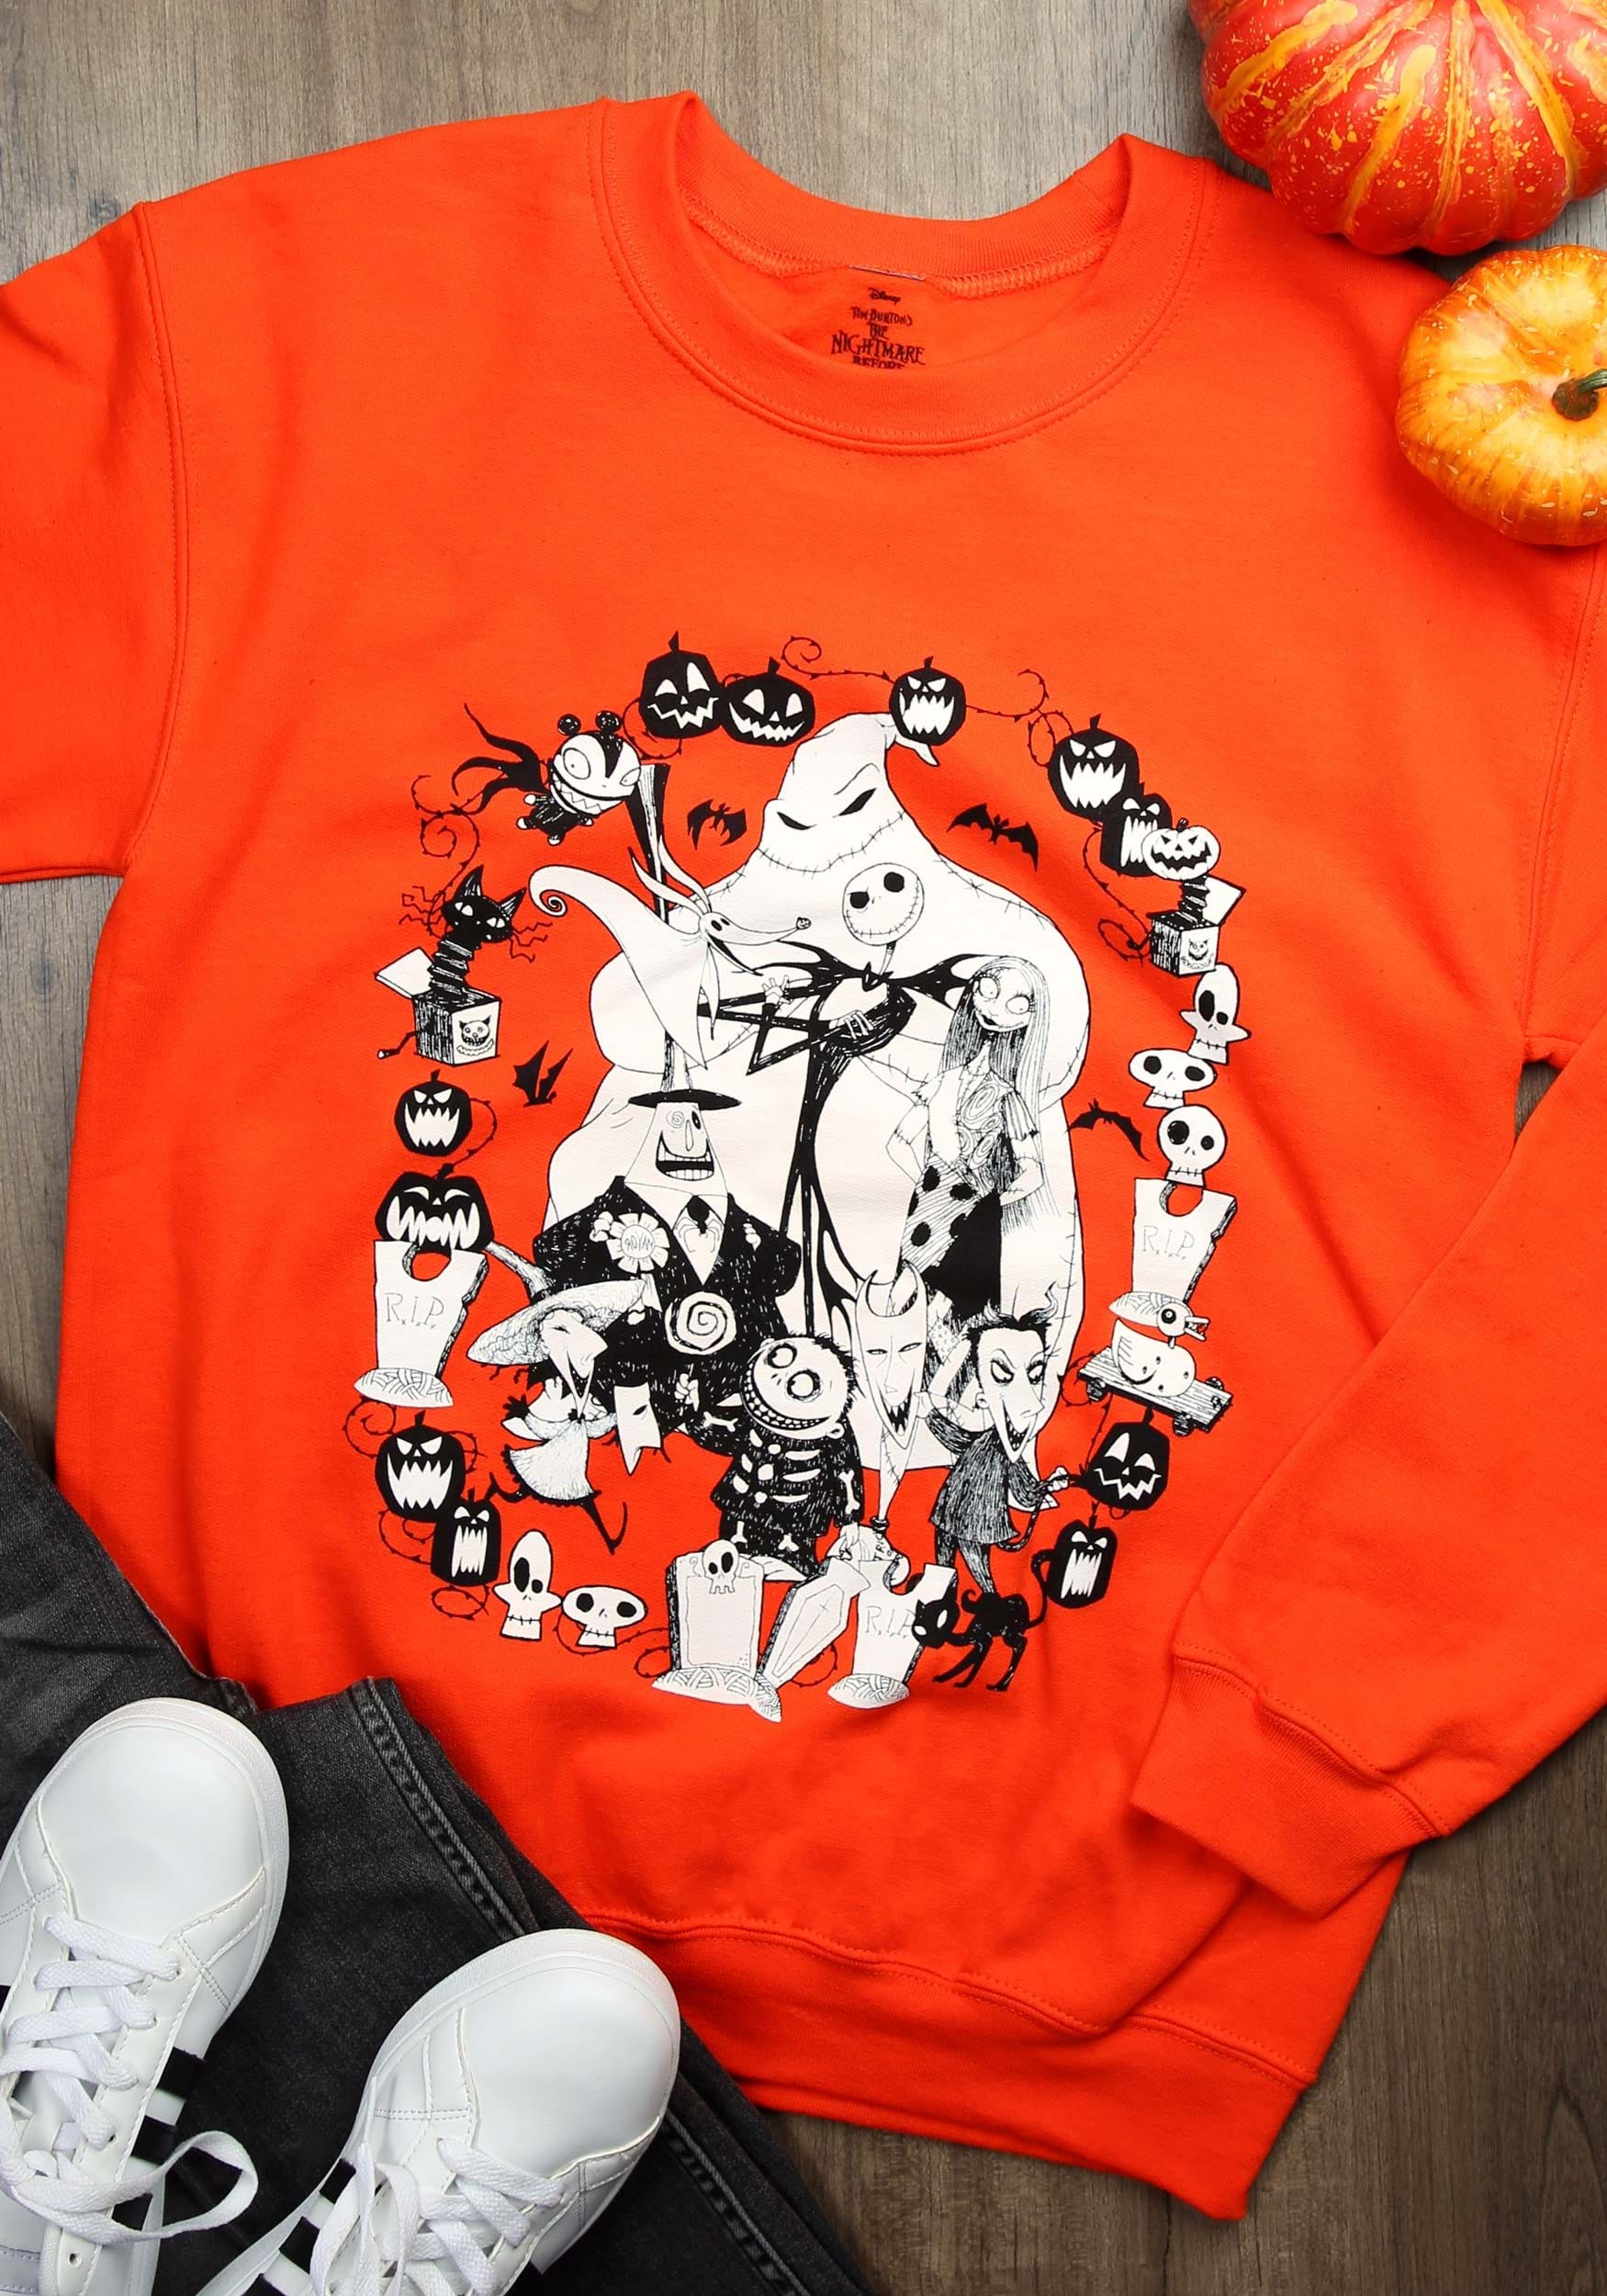 Photos - Fancy Dress Before Jerry Leigh Nightmare  Christmas Orange Sweatshirt for Adults Black& 